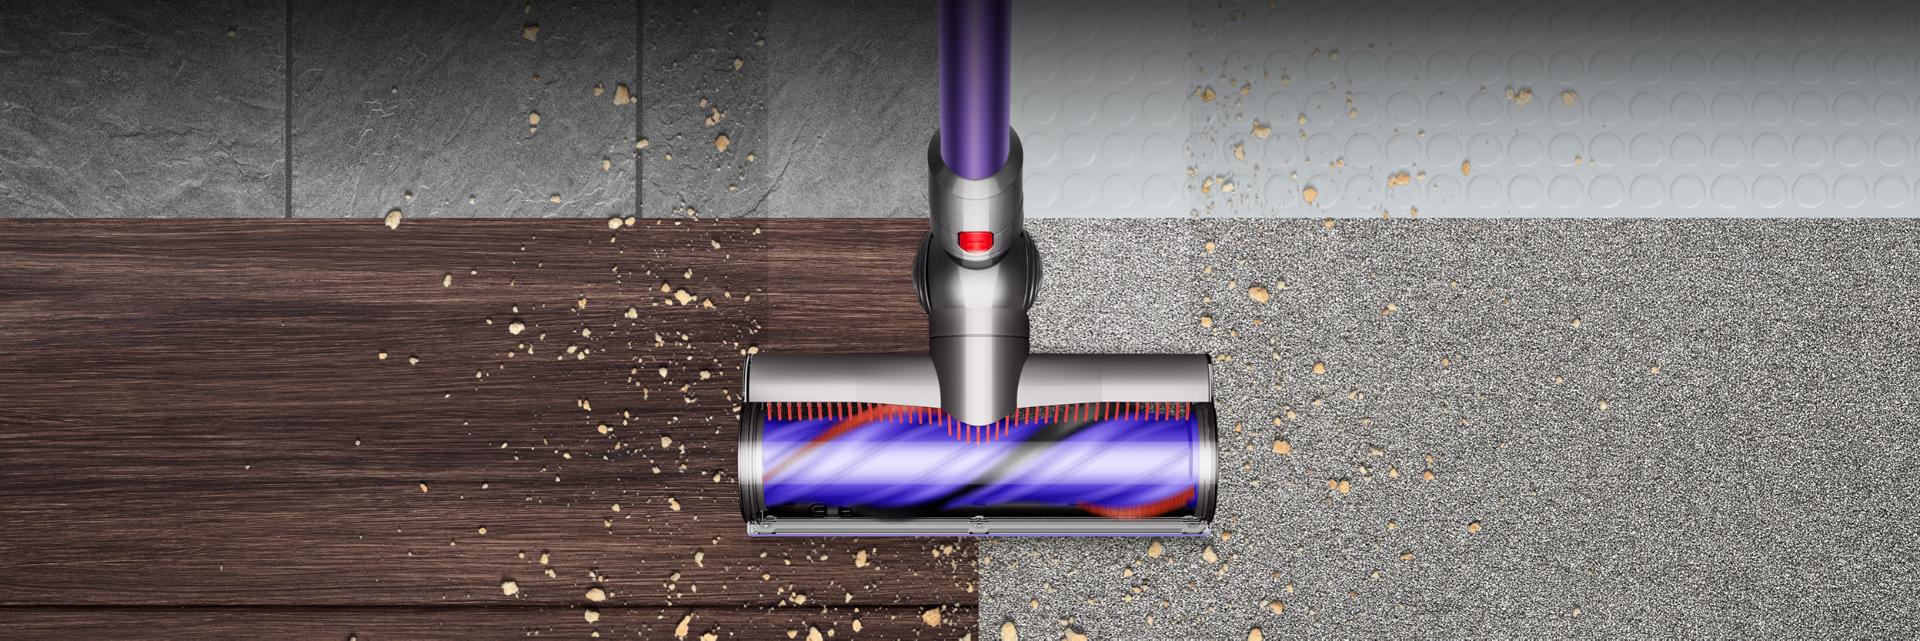 The Dyson Cyclone V10 vacuum cleaner's torque drive cleaner head picking up debris across multiple floor surfaces.